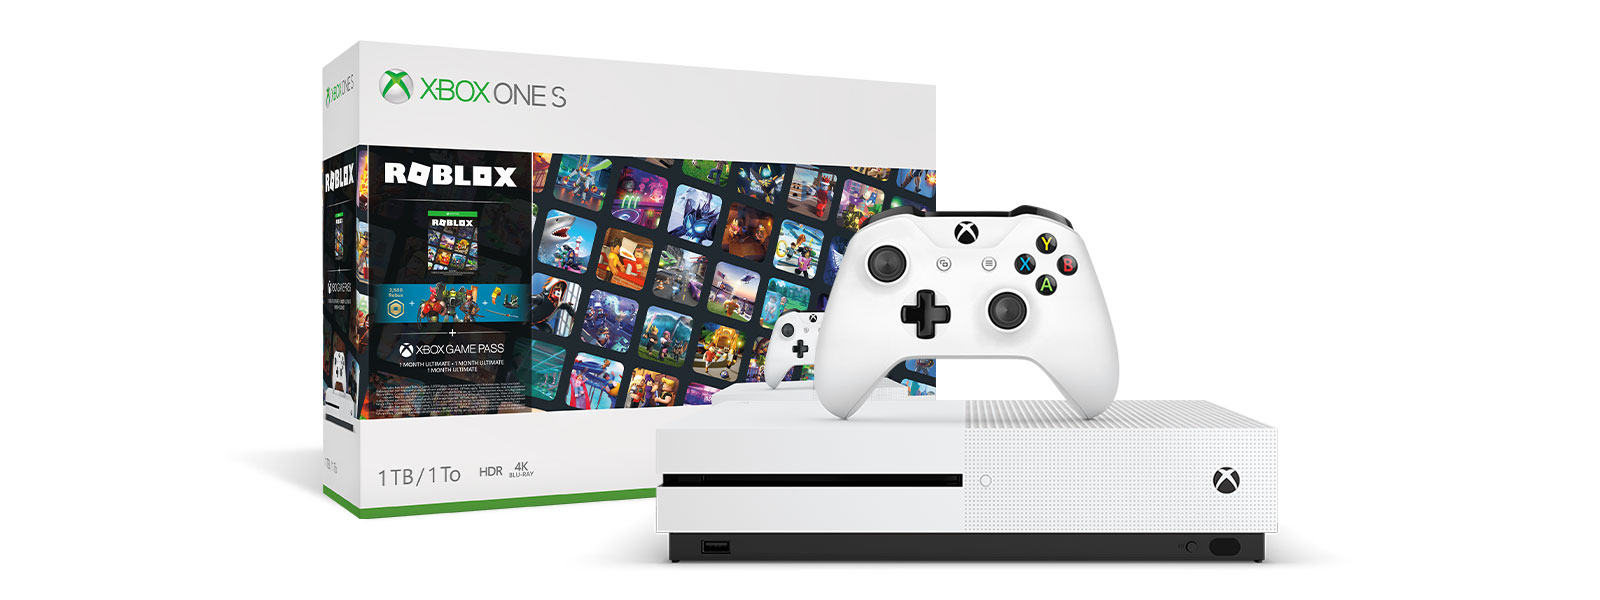 Xbox One S Roblox Bundle 1tb Xbox - a perfect guidance about roblox the best gaming platform